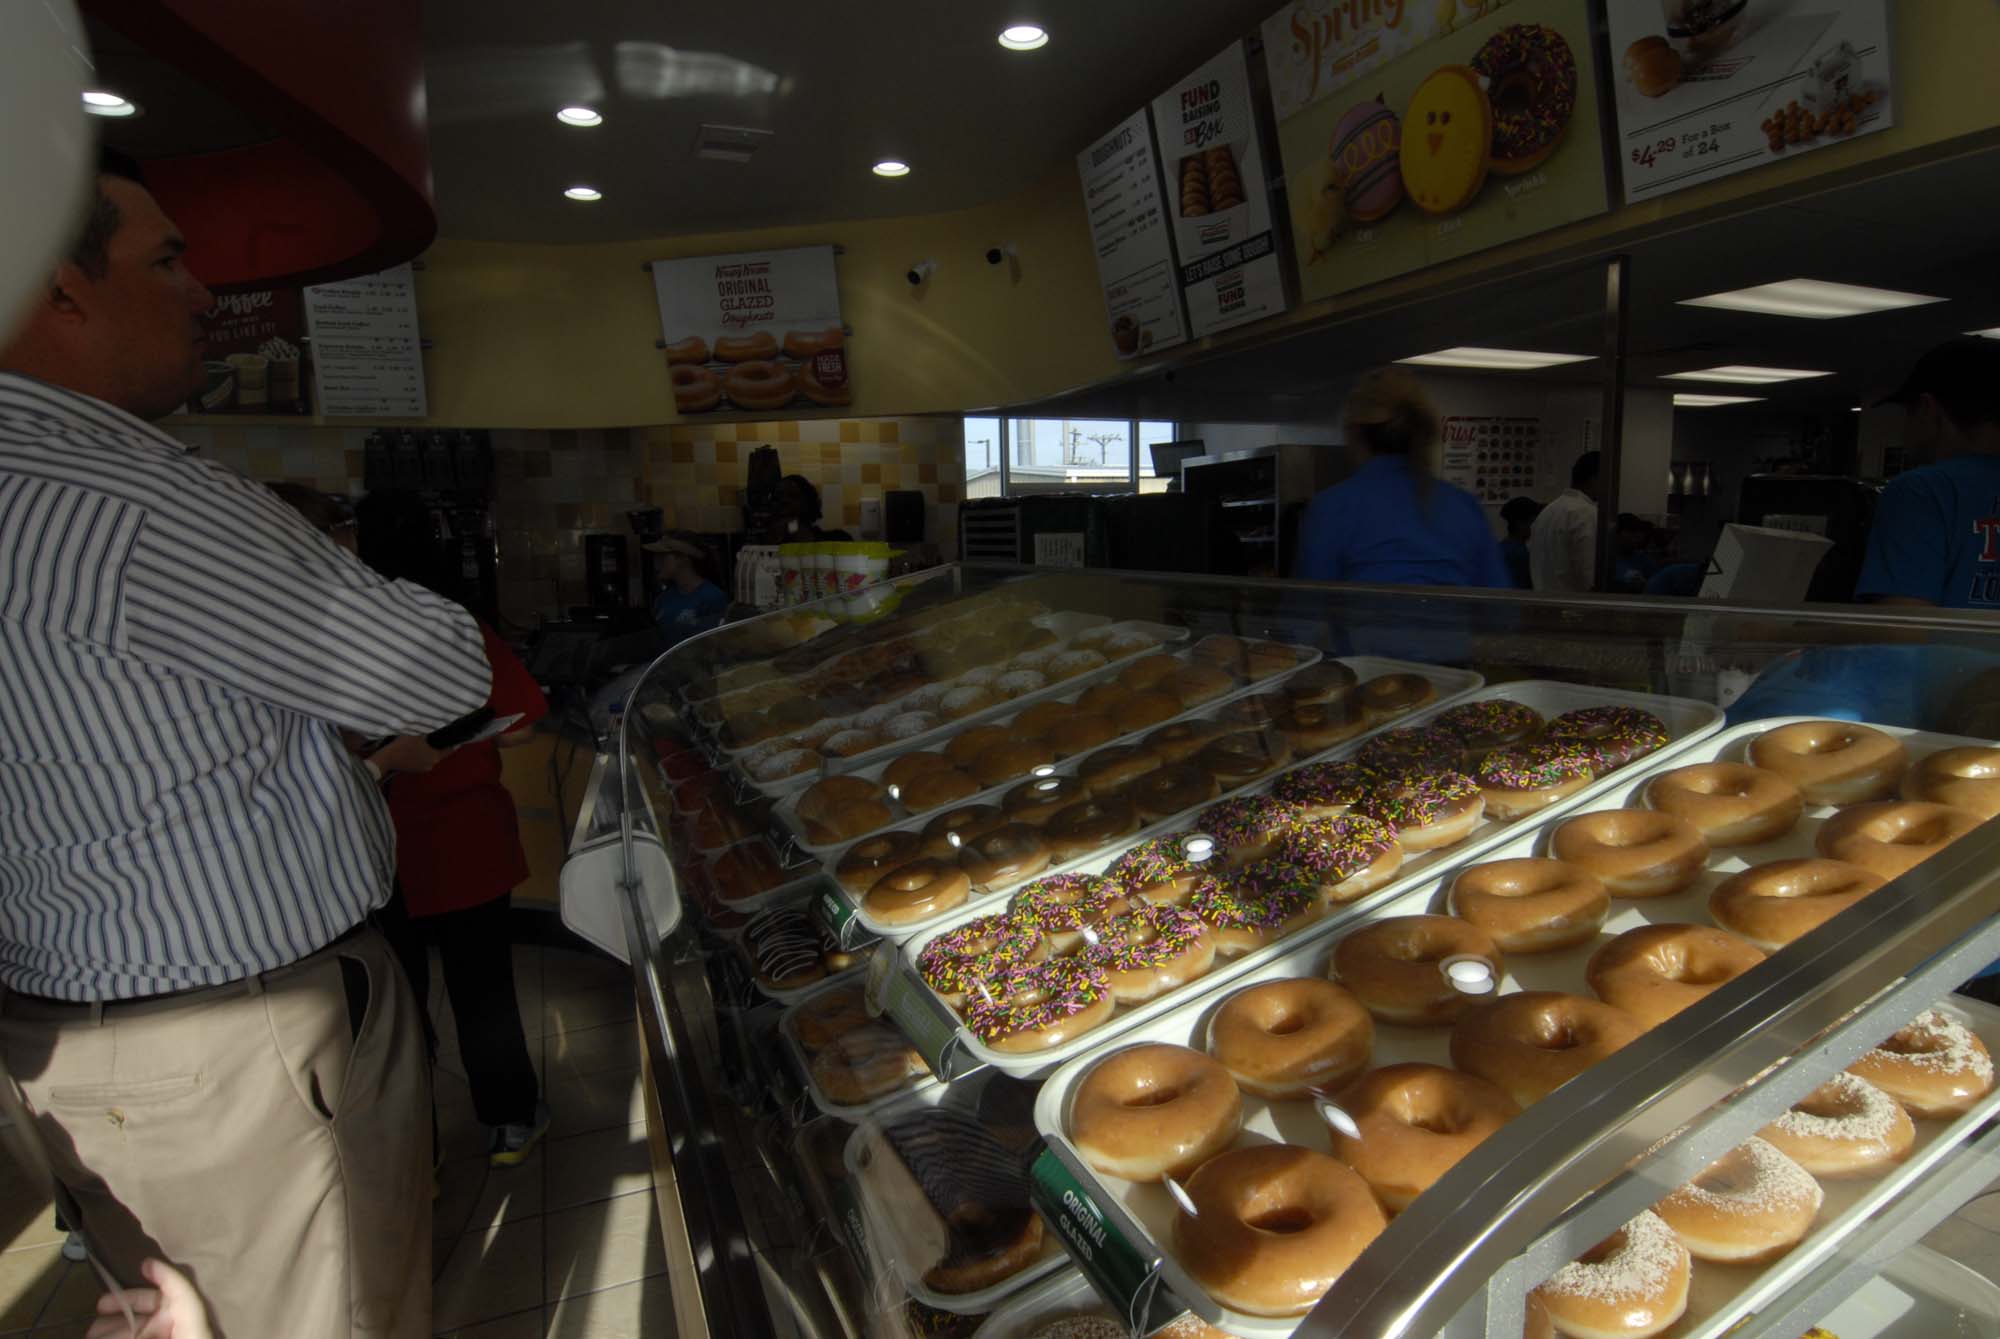 With a wide variety of doughnuts and an avid fan base, Krispy Kreme opened its Allen location to a line of waiting customers.